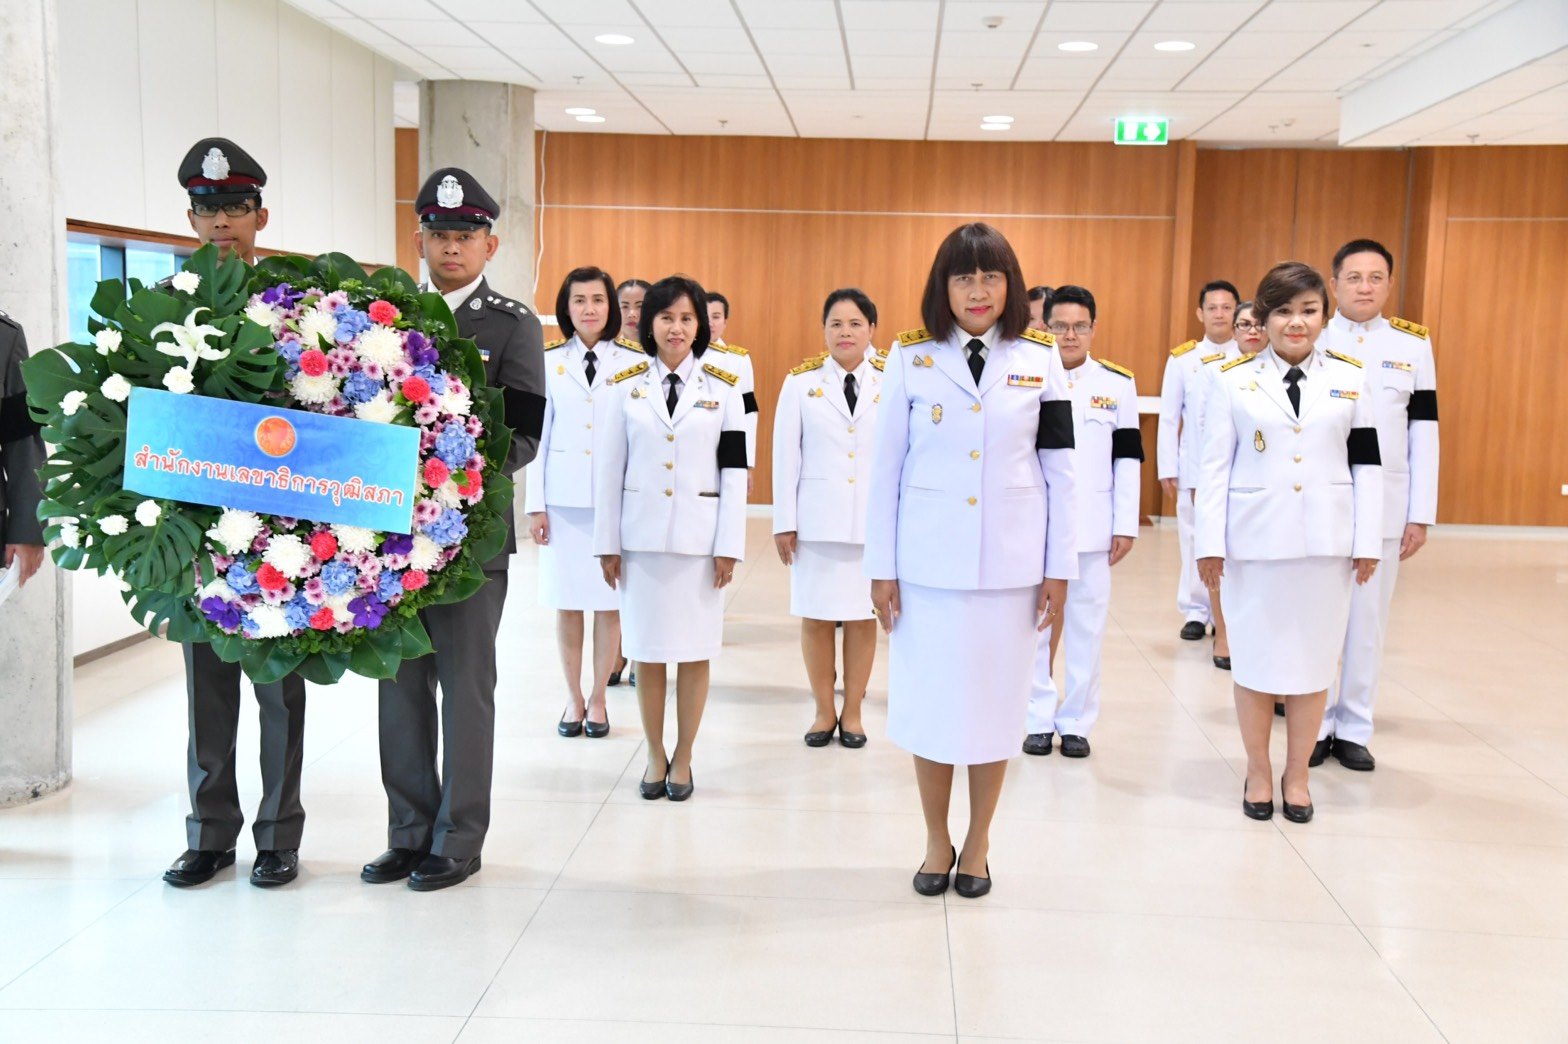 30 May 2019, The Secretariat of the Senate attended the merit-making ceremony (thạksina nuprathan) and paid homage to the Royal Statute of King Prajadhipok on His Majesty Memorial Day.